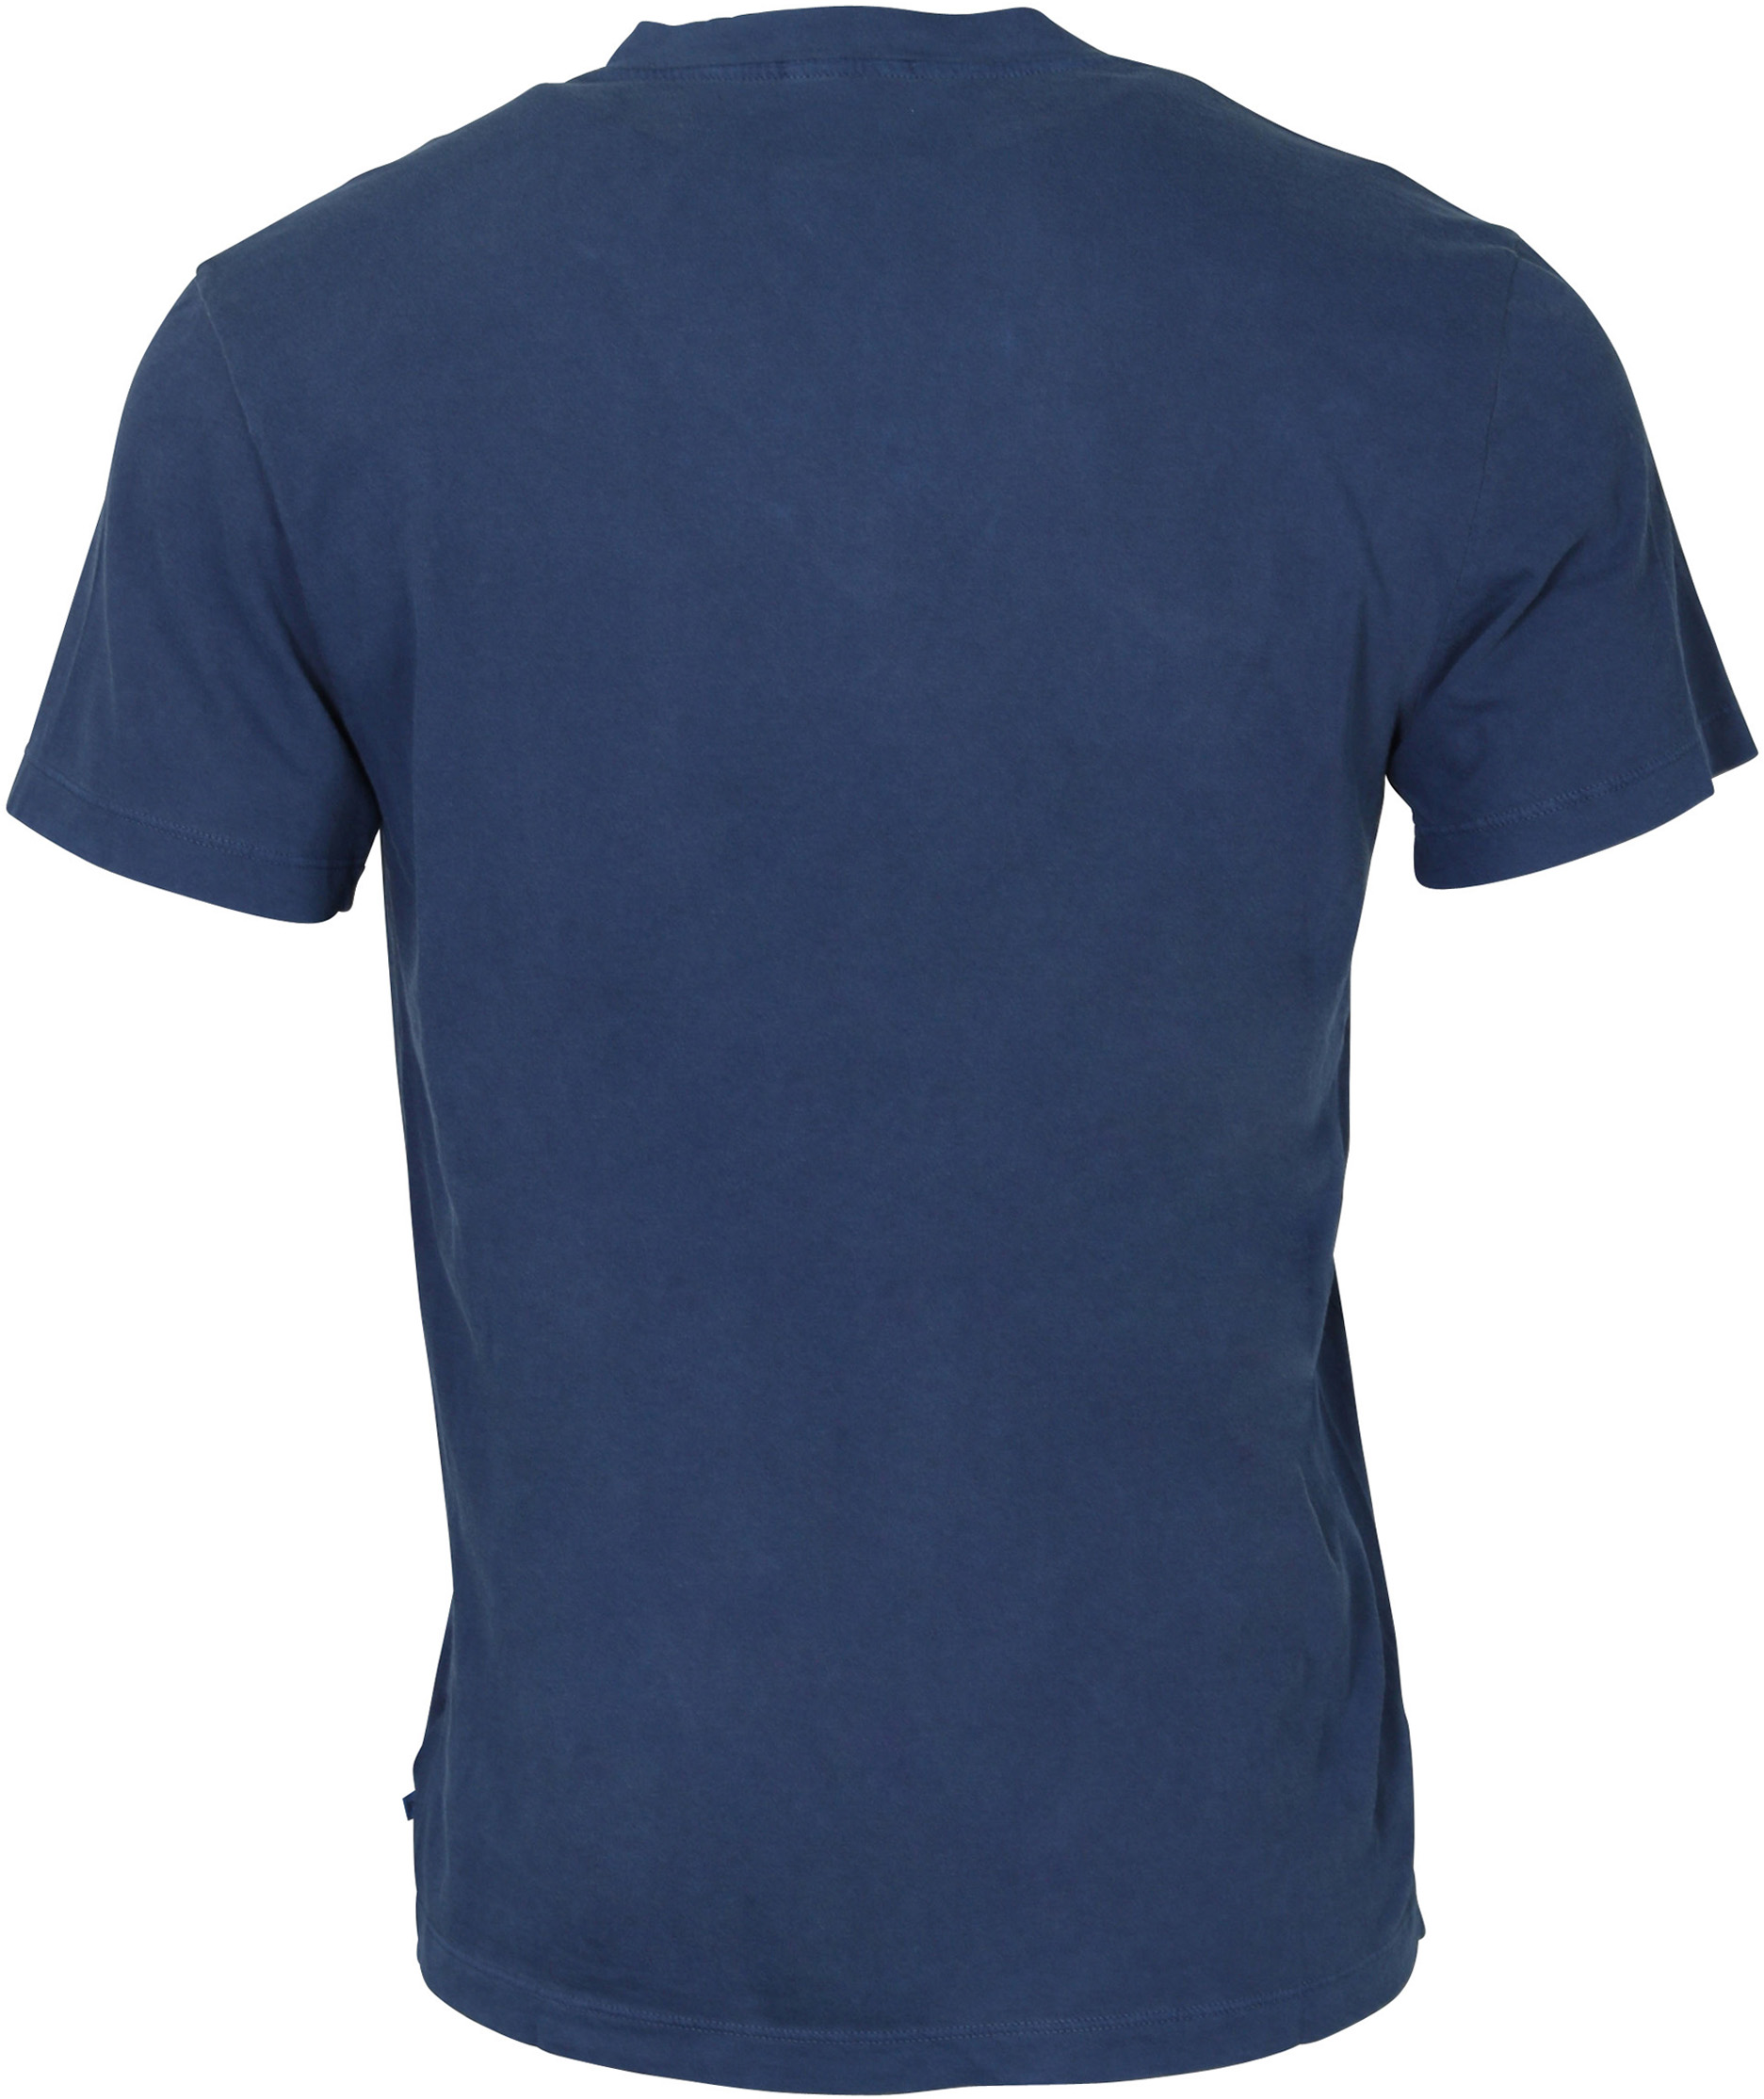 James Perse T-Shirt V-Neck Mid Blue S